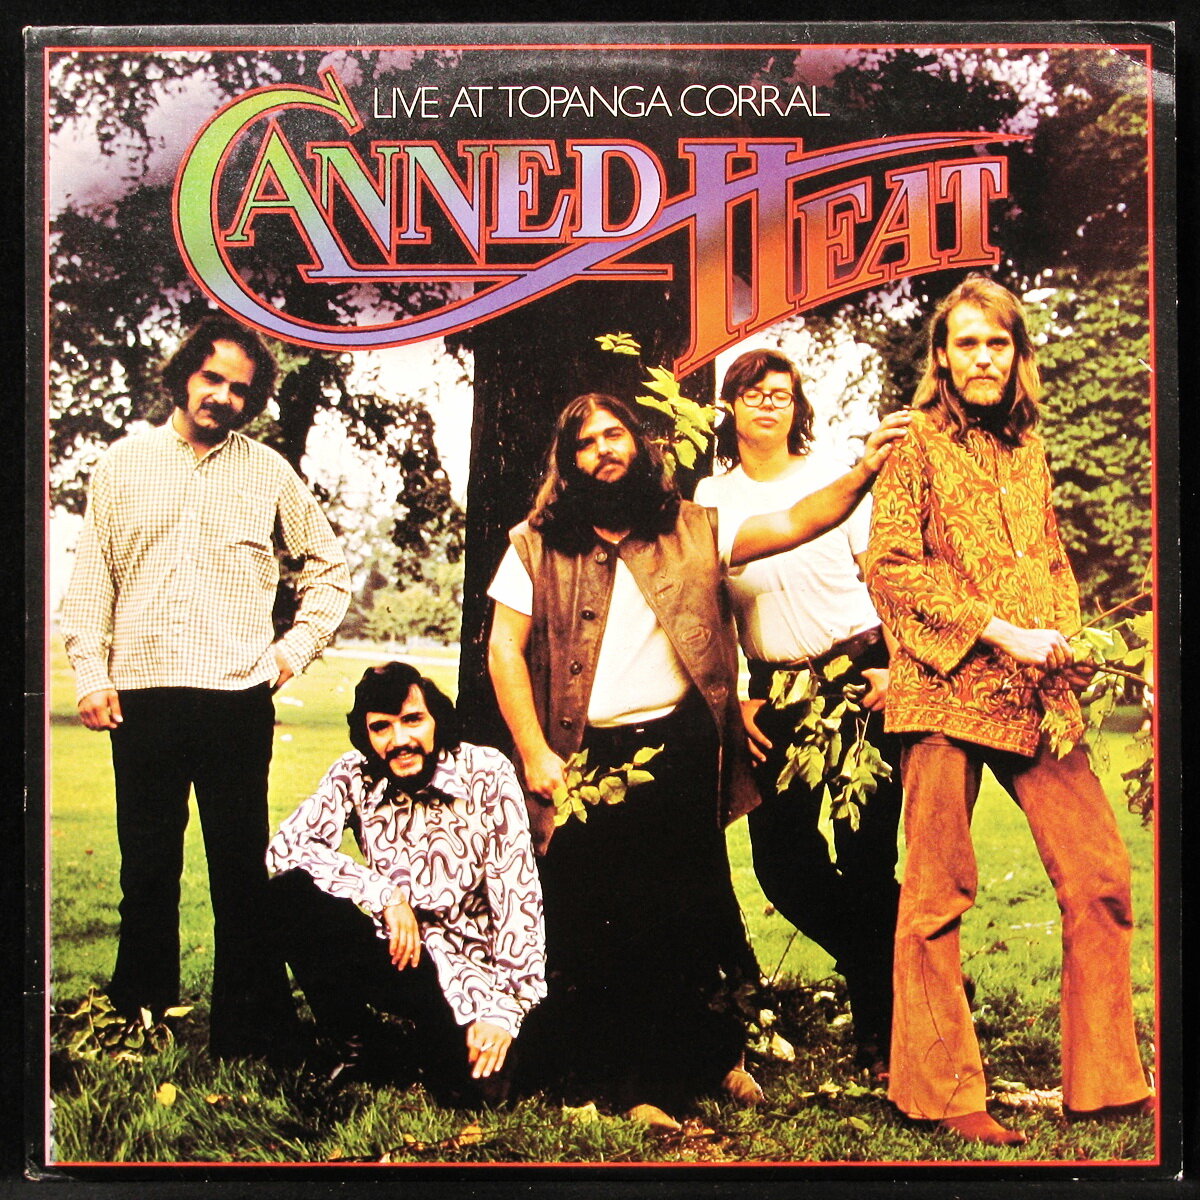 Canned heat steam фото 62